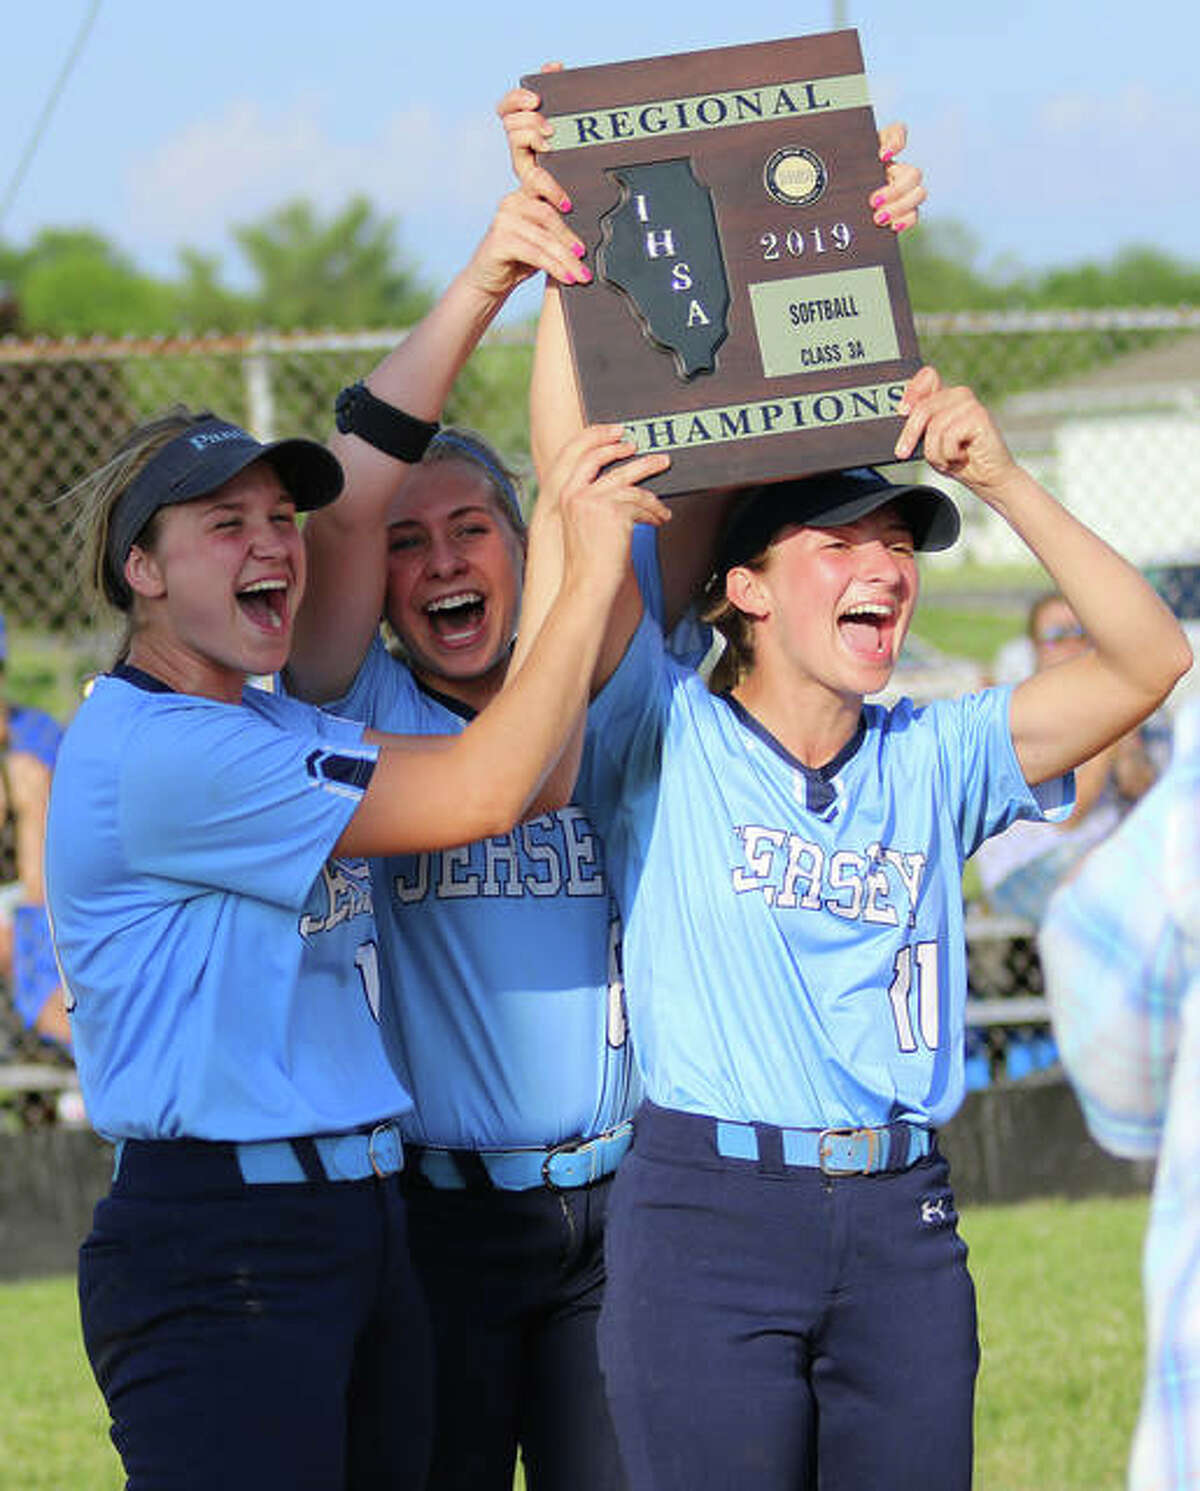 Jersey senior captains (from left) Chelsea Maag, Melissa Weishaupt and Brooke Tuttle deliver the Class 3A regional championship plaque to teammates after beating Columbia 8-1 in the title game at Jerseyville. It is Jersey’s first regional title.